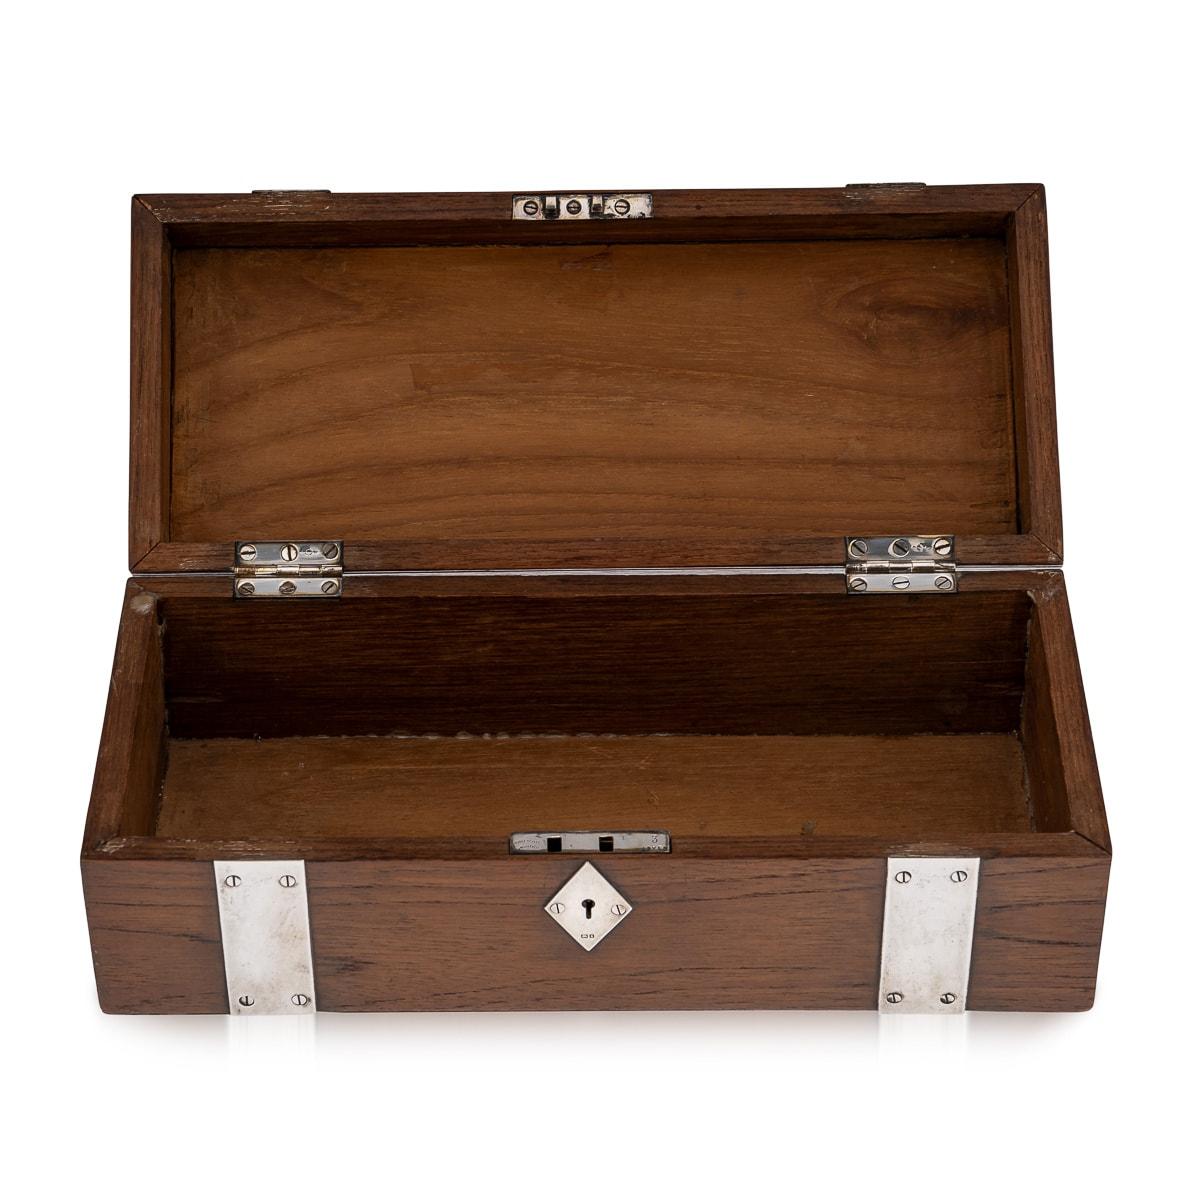 20th Century British Solid Silver & Wood 'H.M.S Majestic' Box, c.1905 For Sale 1